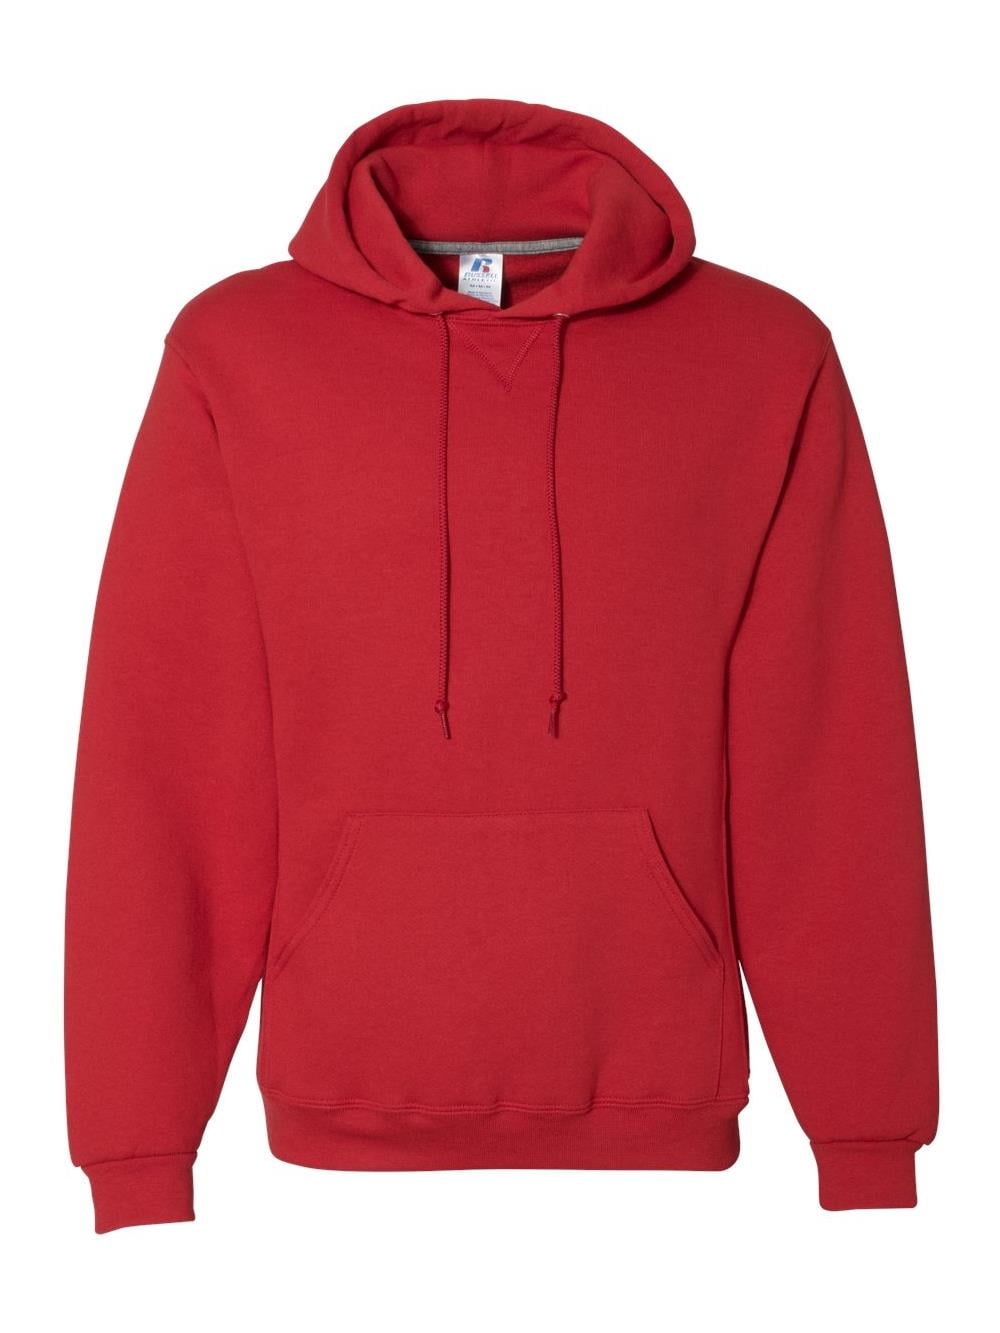 Russell Athletic - Russell Athletic Fleece Dri Power? Hooded Pullover ...